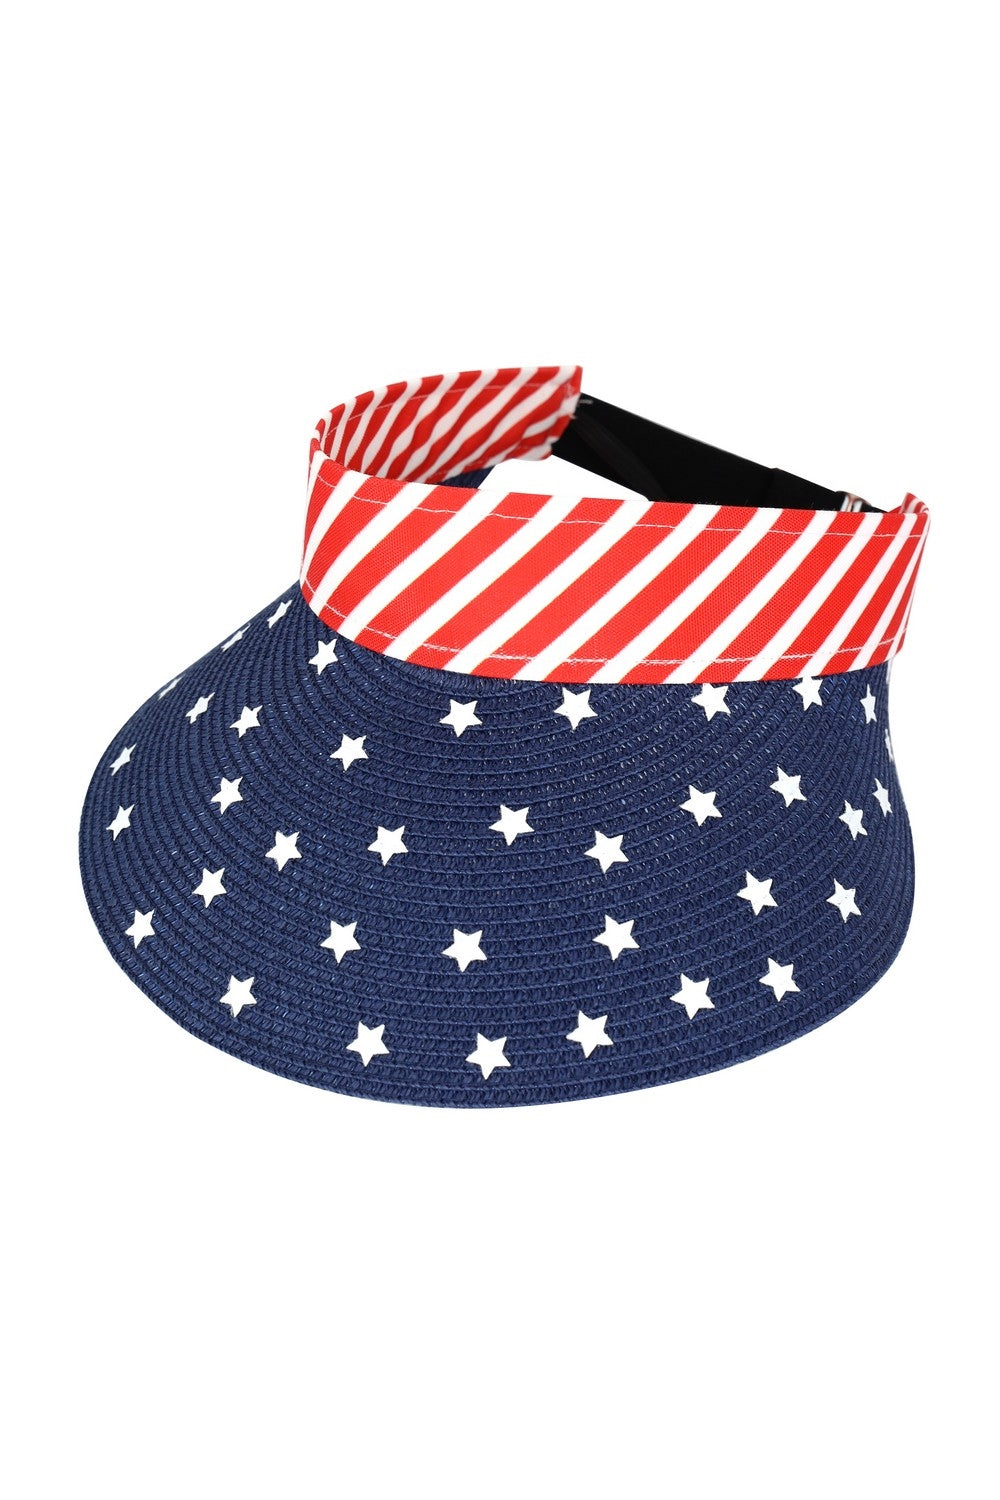 American Flag Roll Up Visor with Adjustable Elastic Band - Pack of 6